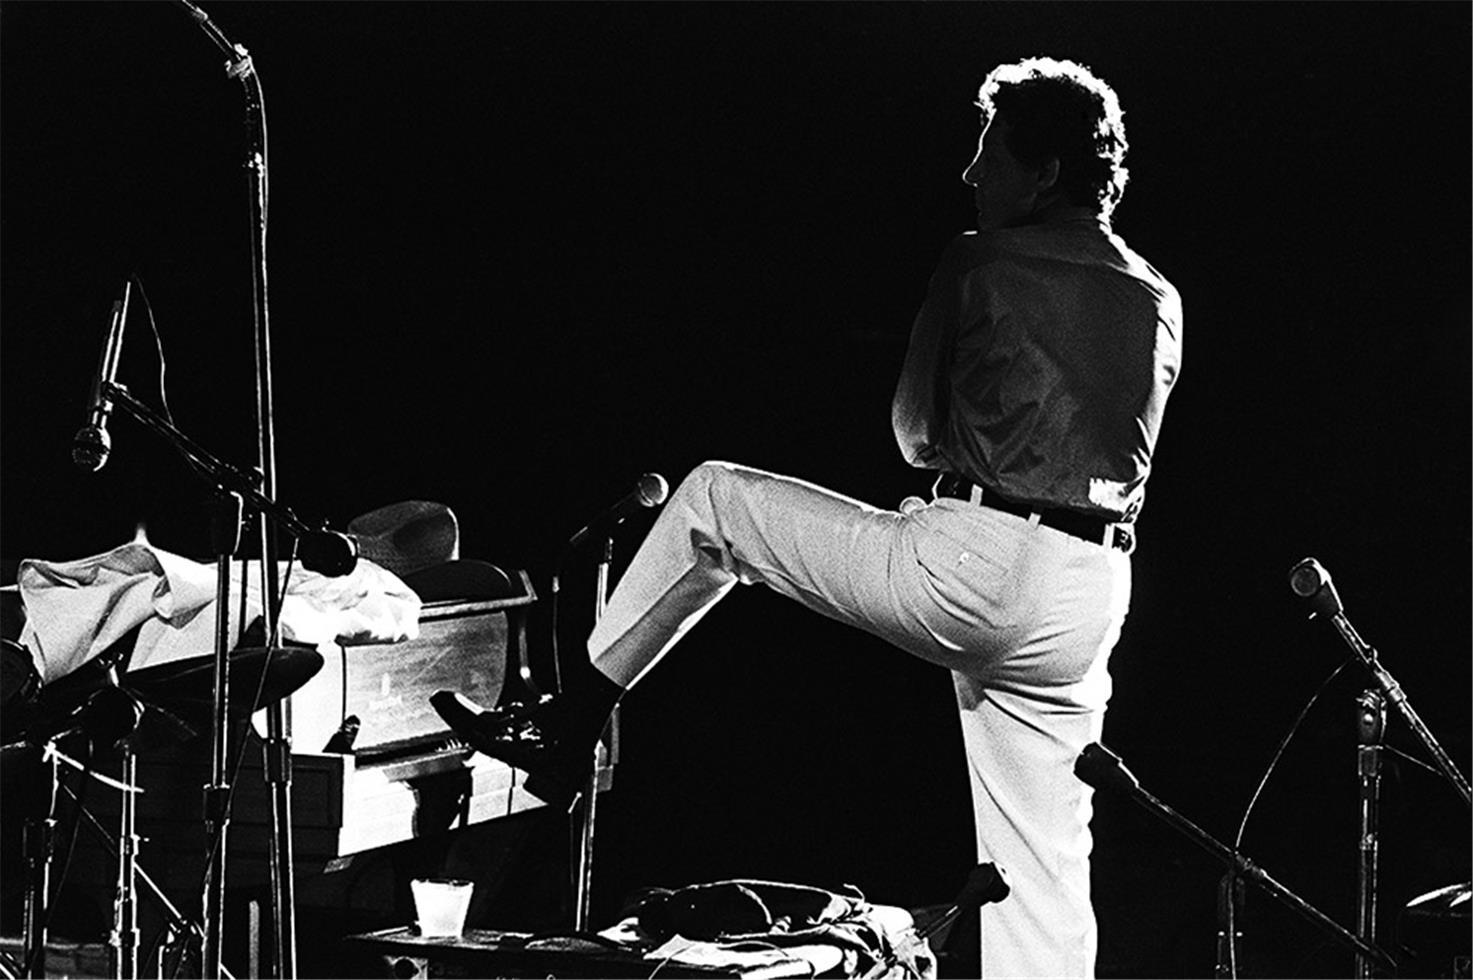  Charlyn Zlotnik Black and White Photograph - Jerry Lee Lewis, 1975